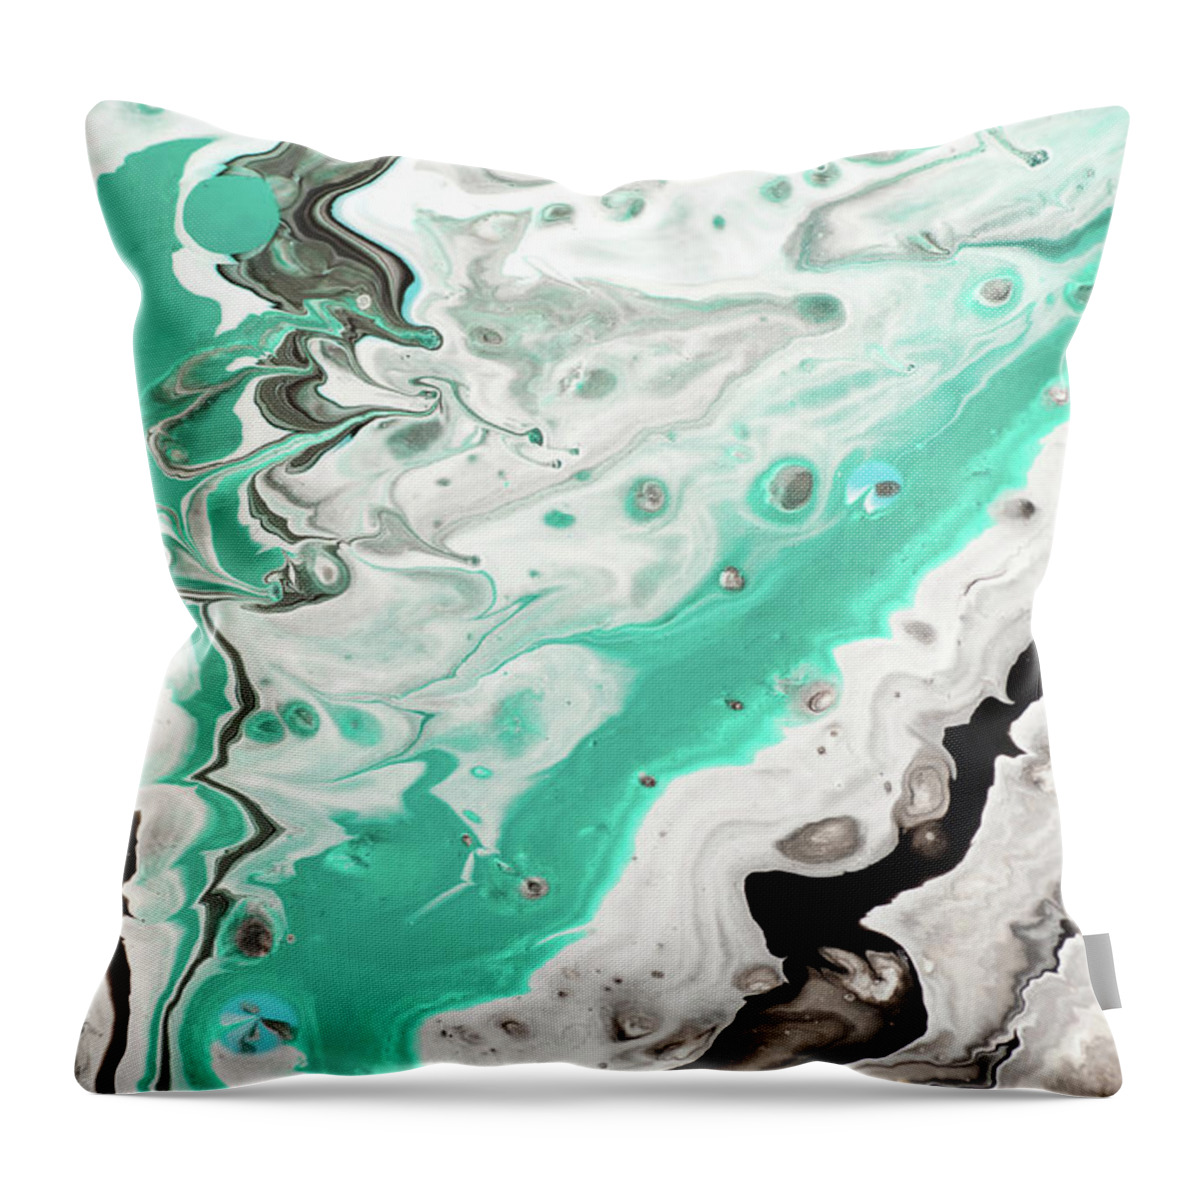 Jenny Rainbow Fine Art Photography Throw Pillow featuring the photograph On Emerald Waves Fragment 1. Abstract Fluid Acrylic Painting by Jenny Rainbow